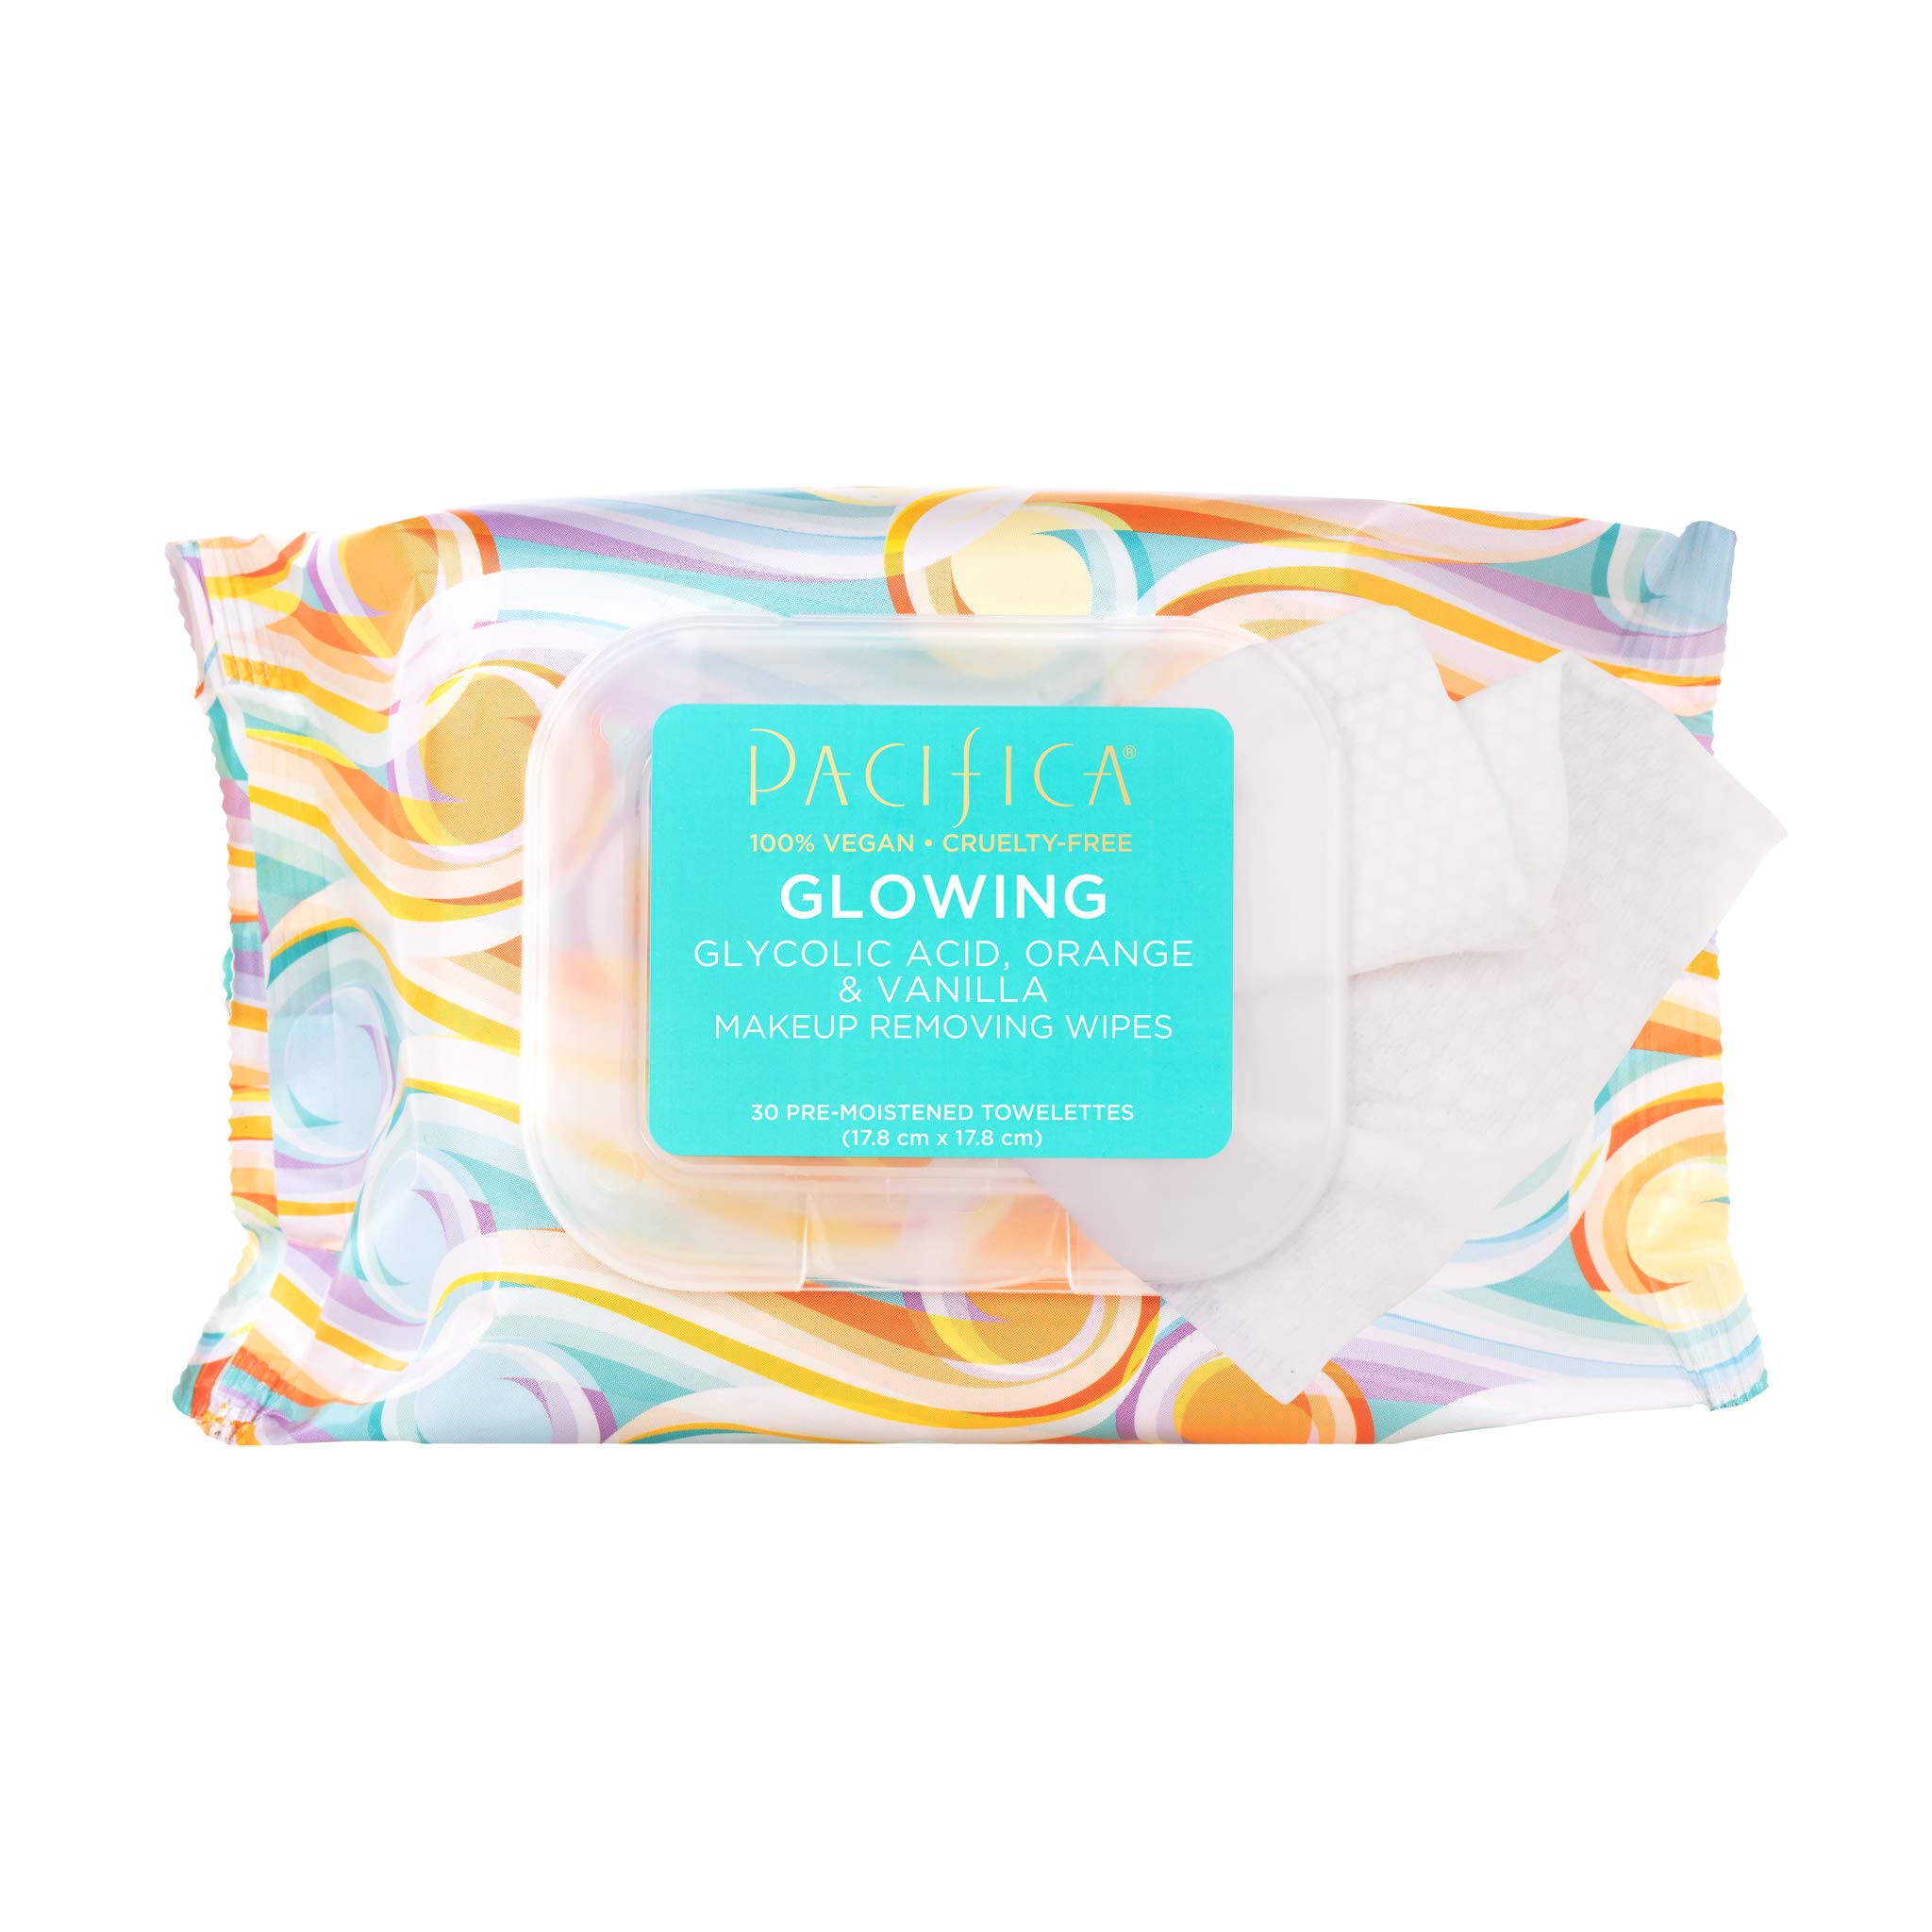 30-Count Pacifica Beauty Glowing Makeup Remover Wipes 3 for $9.25 ($3.08 each) w/ S&S + Free Shipping w/ Prime or on $35+